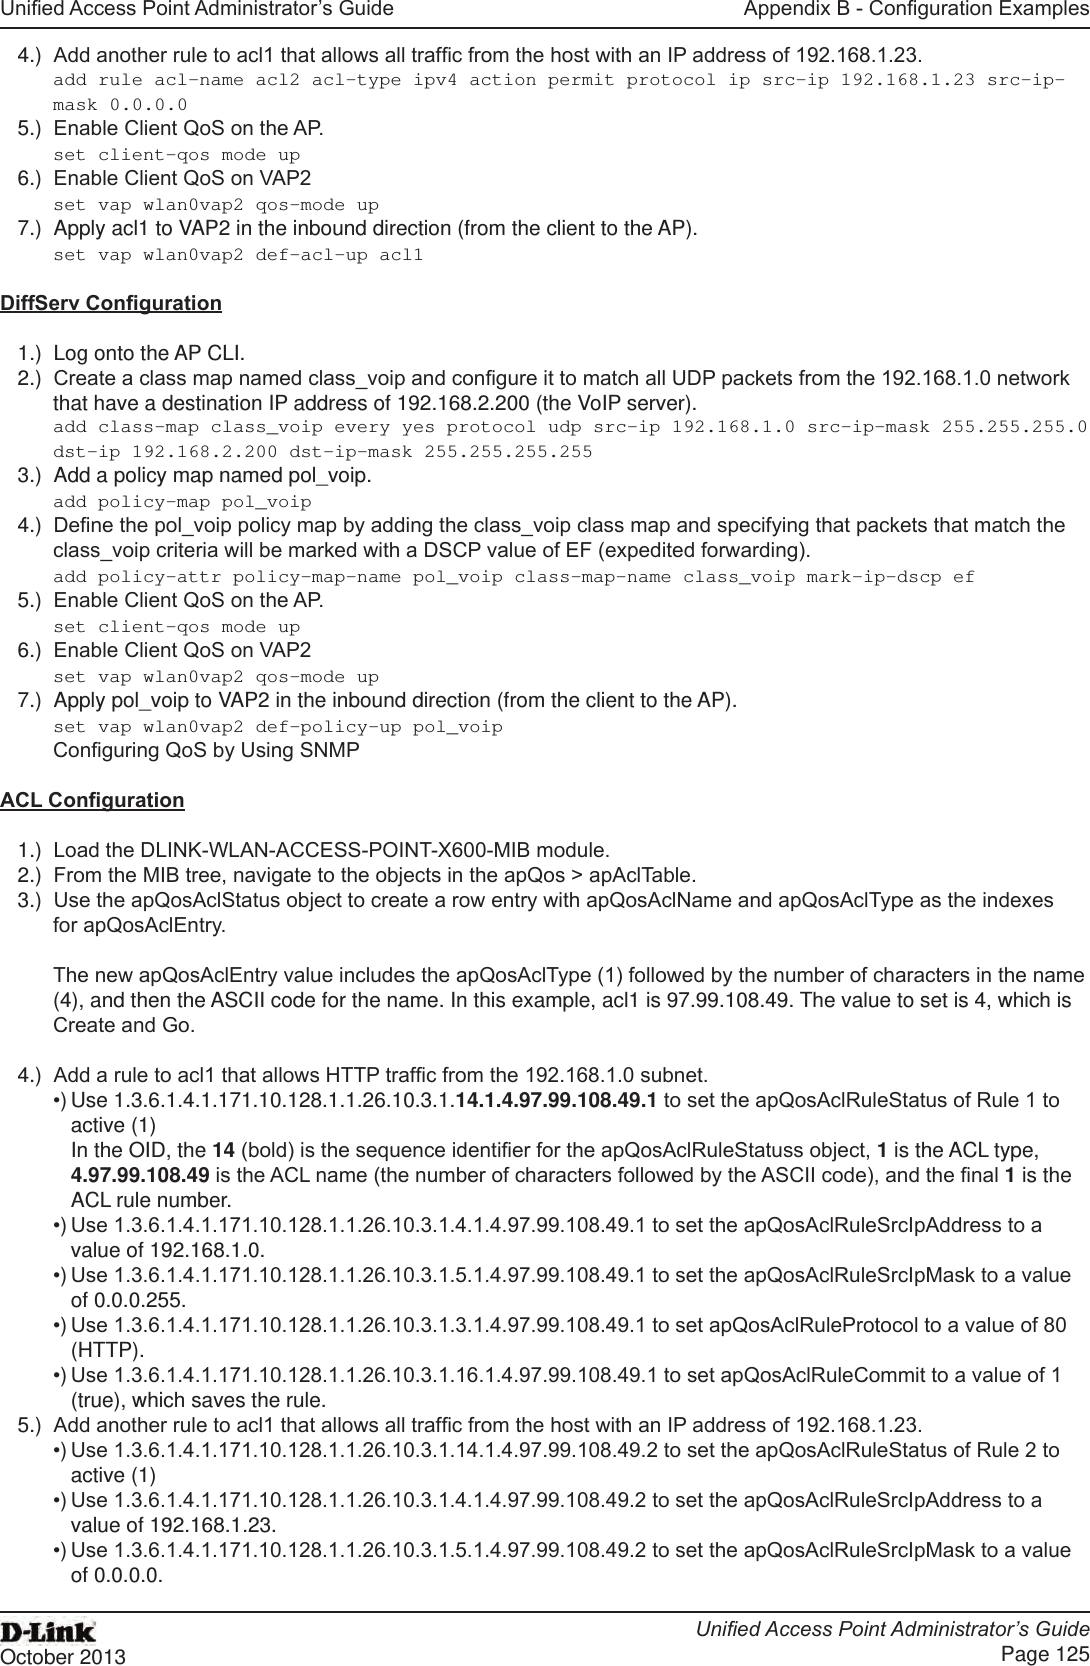 Unied Access Point Administrator’s GuideUnied Access Point Administrator’s GuidePage 125October 2013Appendix B - Conguration Examples4.)  Add another rule to acl1 that allows all trafc from the host with an IP address of 192.168.1.23. add rule acl-name acl2 acl-type ipv4 action permit protocol ip src-ip 192.168.1.23 src-ip-mask 0.0.0.05.)  Enable Client QoS on the AP.set client-qos mode up6.)  Enable Client QoS on VAP2set vap wlan0vap2 qos-mode up7.)  Apply acl1 to VAP2 in the inbound direction (from the client to the AP). set vap wlan0vap2 def-acl-up acl1 DiffServ Conguration1.)  Log onto the AP CLI.2.)  Create a class map named class_voip and congure it to match all UDP packets from the 192.168.1.0 network that have a destination IP address of 192.168.2.200 (the VoIP server). add class-map class_voip every yes protocol udp src-ip 192.168.1.0 src-ip-mask 255.255.255.0 dst-ip 192.168.2.200 dst-ip-mask 255.255.255.255 3.)  Add a policy map named pol_voip.add policy-map pol_voip4.)  Dene the pol_voip policy map by adding the class_voip class map and specifying that packets that match the class_voip criteria will be marked with a DSCP value of EF (expedited forwarding).add policy-attr policy-map-name pol_voip class-map-name class_voip mark-ip-dscp ef5.)  Enable Client QoS on the AP.set client-qos mode up6.)  Enable Client QoS on VAP2set vap wlan0vap2 qos-mode up7.)  Apply pol_voip to VAP2 in the inbound direction (from the client to the AP). set vap wlan0vap2 def-policy-up pol_voip Conguring QoS by Using SNMPACL Conguration1.)  Load the DLINK-WLAN-ACCESS-POINT-X600-MIB module.2.)  From the MIB tree, navigate to the objects in the apQos &gt; apAclTable.3.)  Use the apQosAclStatus object to create a row entry with apQosAclName and apQosAclType as the indexes for apQosAclEntry.The new apQosAclEntry value includes the apQosAclType (1) followed by the number of characters in the name (4), and then the ASCII code for the name. In this example, acl1 is 97.99.108.49. The value to set is 4, which is Create and Go.4.)  Add a rule to acl1 that allows HTTP trafc from the 192.168.1.0 subnet. •) Use 1.3.6.1.4.1.171.10.128.1.1.26.10.3.1.14.1.4.97.99.108.49.1 to set the apQosAclRuleStatus of Rule 1 to active (1)In the OID, the 14 (bold) is the sequence identier for the apQosAclRuleStatuss object, 1 is the ACL type, 4.97.99.108.49 is the ACL name (the number of characters followed by the ASCII code), and the nal 1 is the ACL rule number.•) Use 1.3.6.1.4.1.171.10.128.1.1.26.10.3.1.4.1.4.97.99.108.49.1 to set the apQosAclRuleSrcIpAddress to a value of 192.168.1.0.•) Use 1.3.6.1.4.1.171.10.128.1.1.26.10.3.1.5.1.4.97.99.108.49.1 to set the apQosAclRuleSrcIpMask to a value of 0.0.0.255.•) Use 1.3.6.1.4.1.171.10.128.1.1.26.10.3.1.3.1.4.97.99.108.49.1 to set apQosAclRuleProtocol to a value of 80 (HTTP).•) Use 1.3.6.1.4.1.171.10.128.1.1.26.10.3.1.16.1.4.97.99.108.49.1 to set apQosAclRuleCommit to a value of 1 (true), which saves the rule.5.)  Add another rule to acl1 that allows all trafc from the host with an IP address of 192.168.1.23. •) Use 1.3.6.1.4.1.171.10.128.1.1.26.10.3.1.14.1.4.97.99.108.49.2 to set the apQosAclRuleStatus of Rule 2 to active (1)•) Use 1.3.6.1.4.1.171.10.128.1.1.26.10.3.1.4.1.4.97.99.108.49.2 to set the apQosAclRuleSrcIpAddress to a value of 192.168.1.23.•) Use 1.3.6.1.4.1.171.10.128.1.1.26.10.3.1.5.1.4.97.99.108.49.2 to set the apQosAclRuleSrcIpMask to a value of 0.0.0.0.